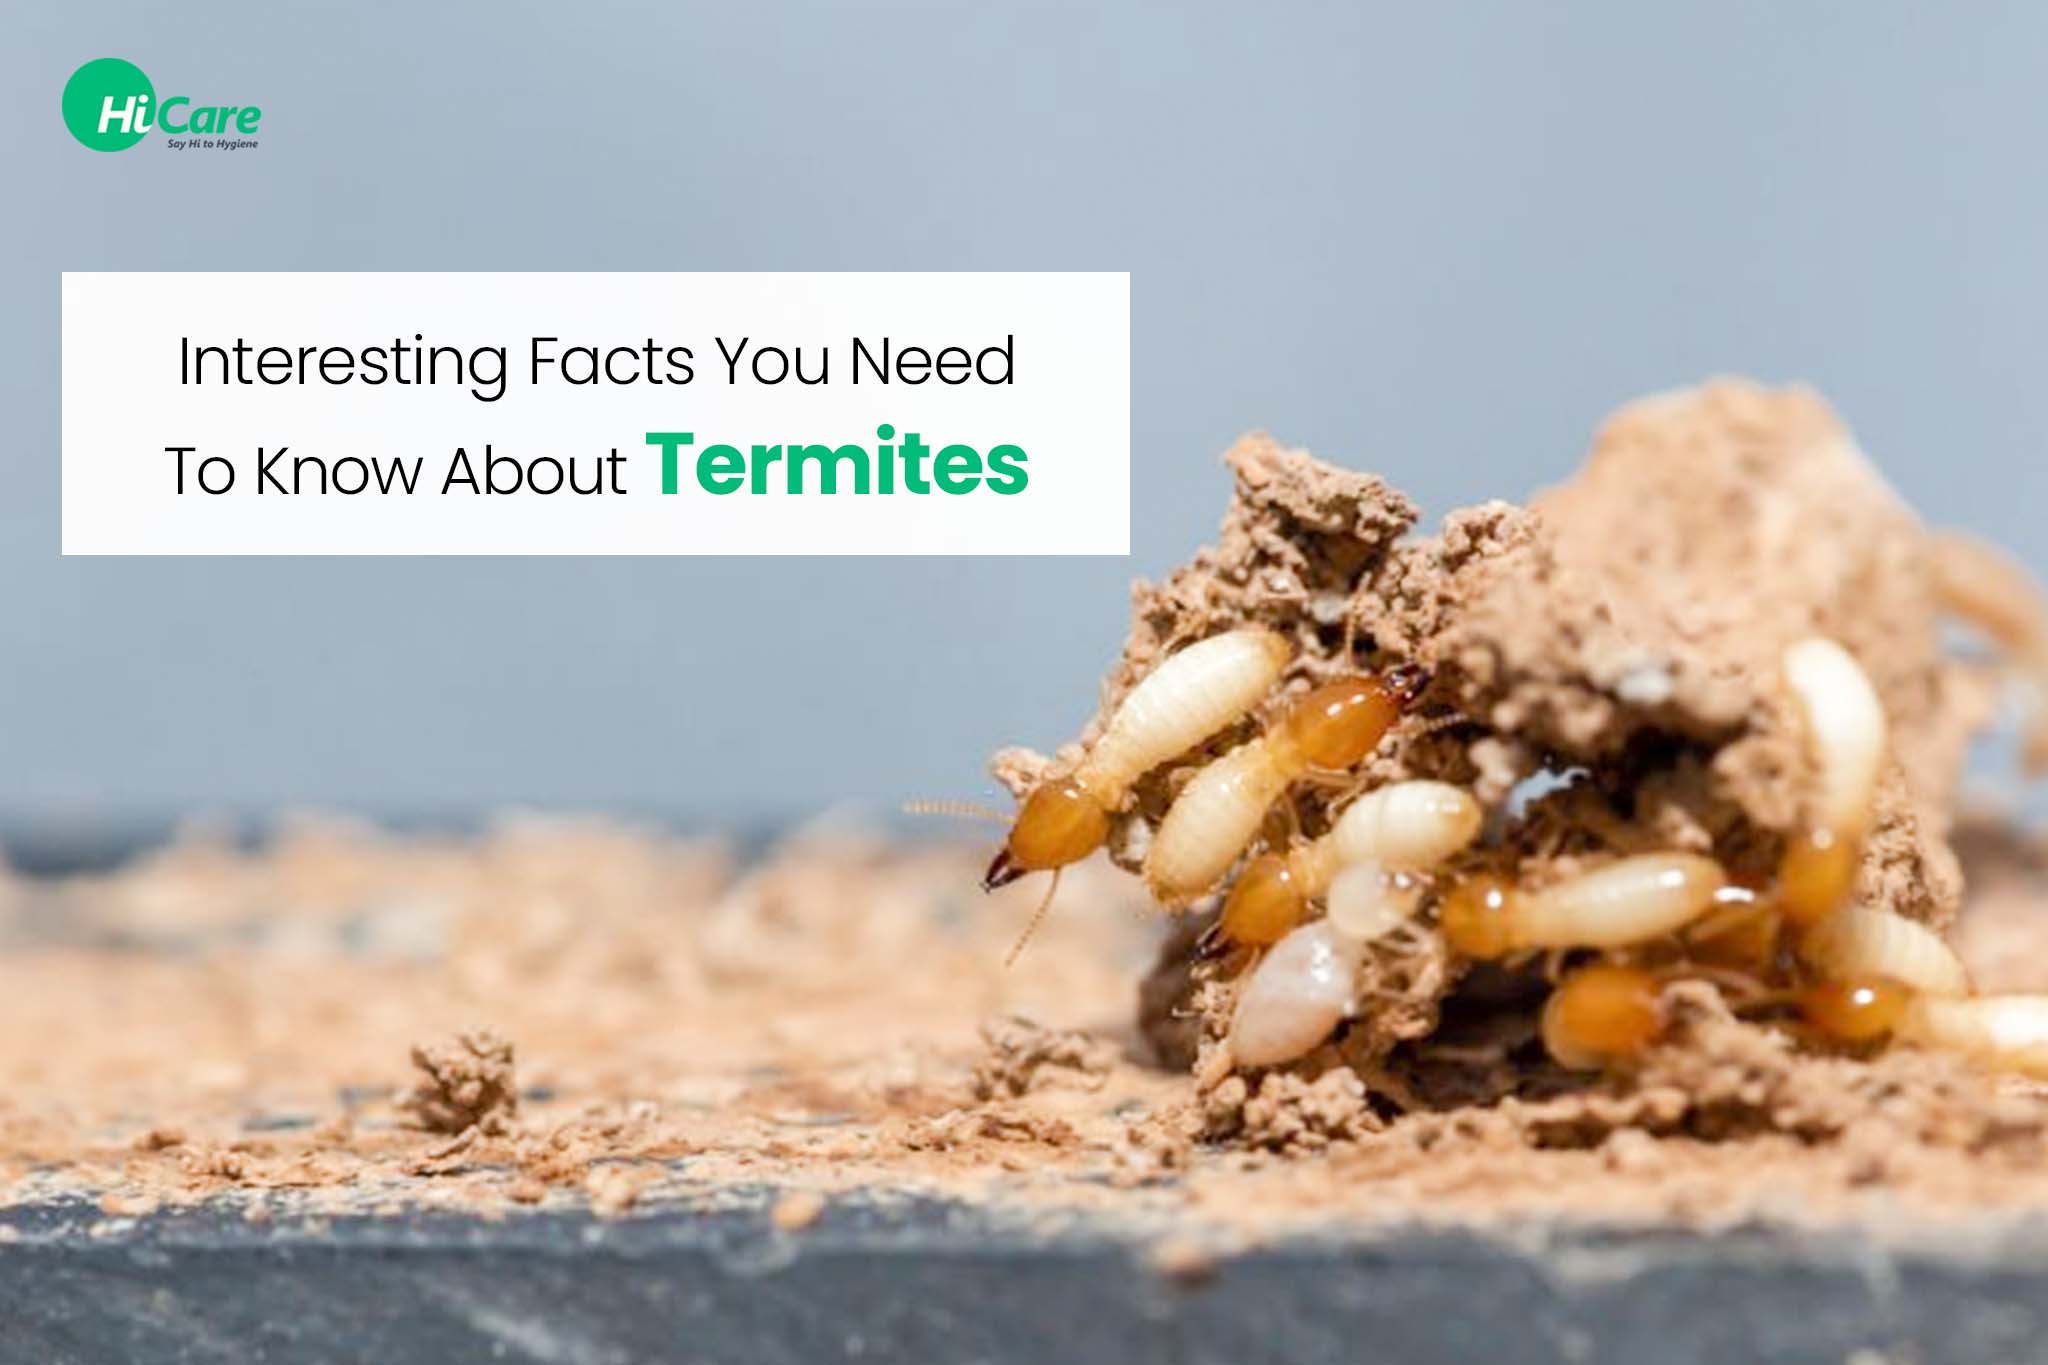 6 Interesting Facts You Need To Know About Termites